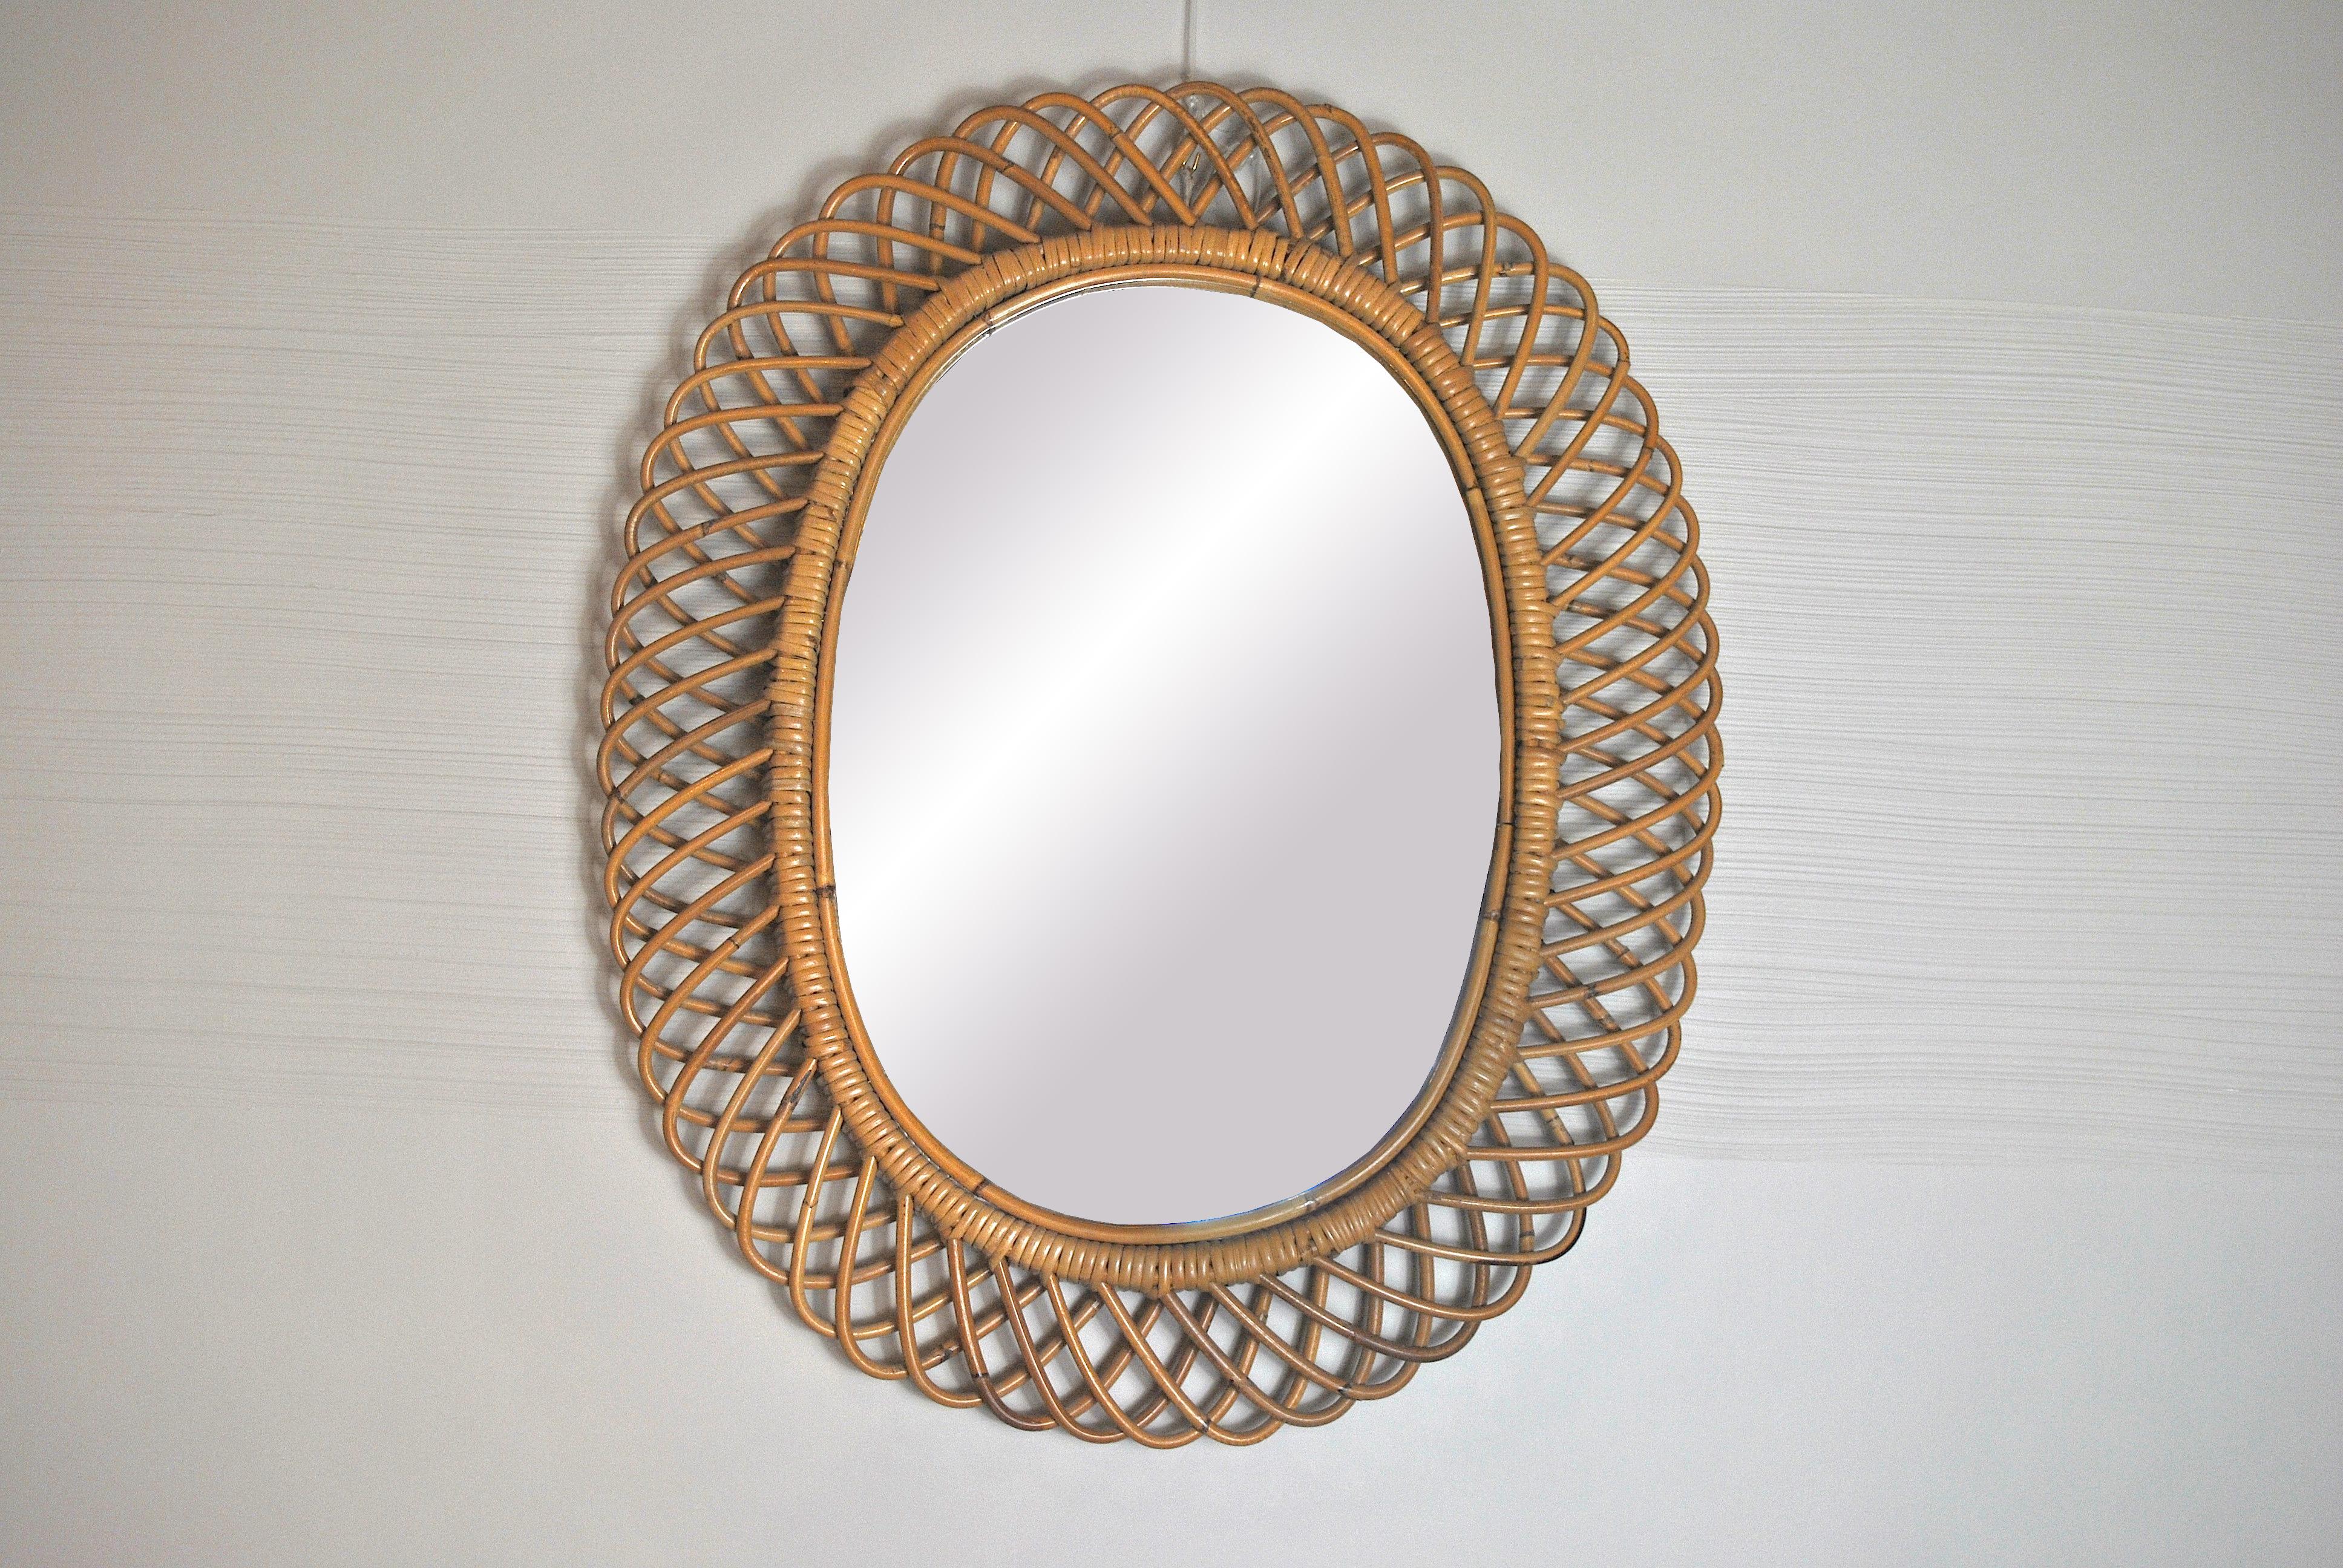 Midcentury wicker and bamboo oval mirror in the style of Franco Albini in very good condition.